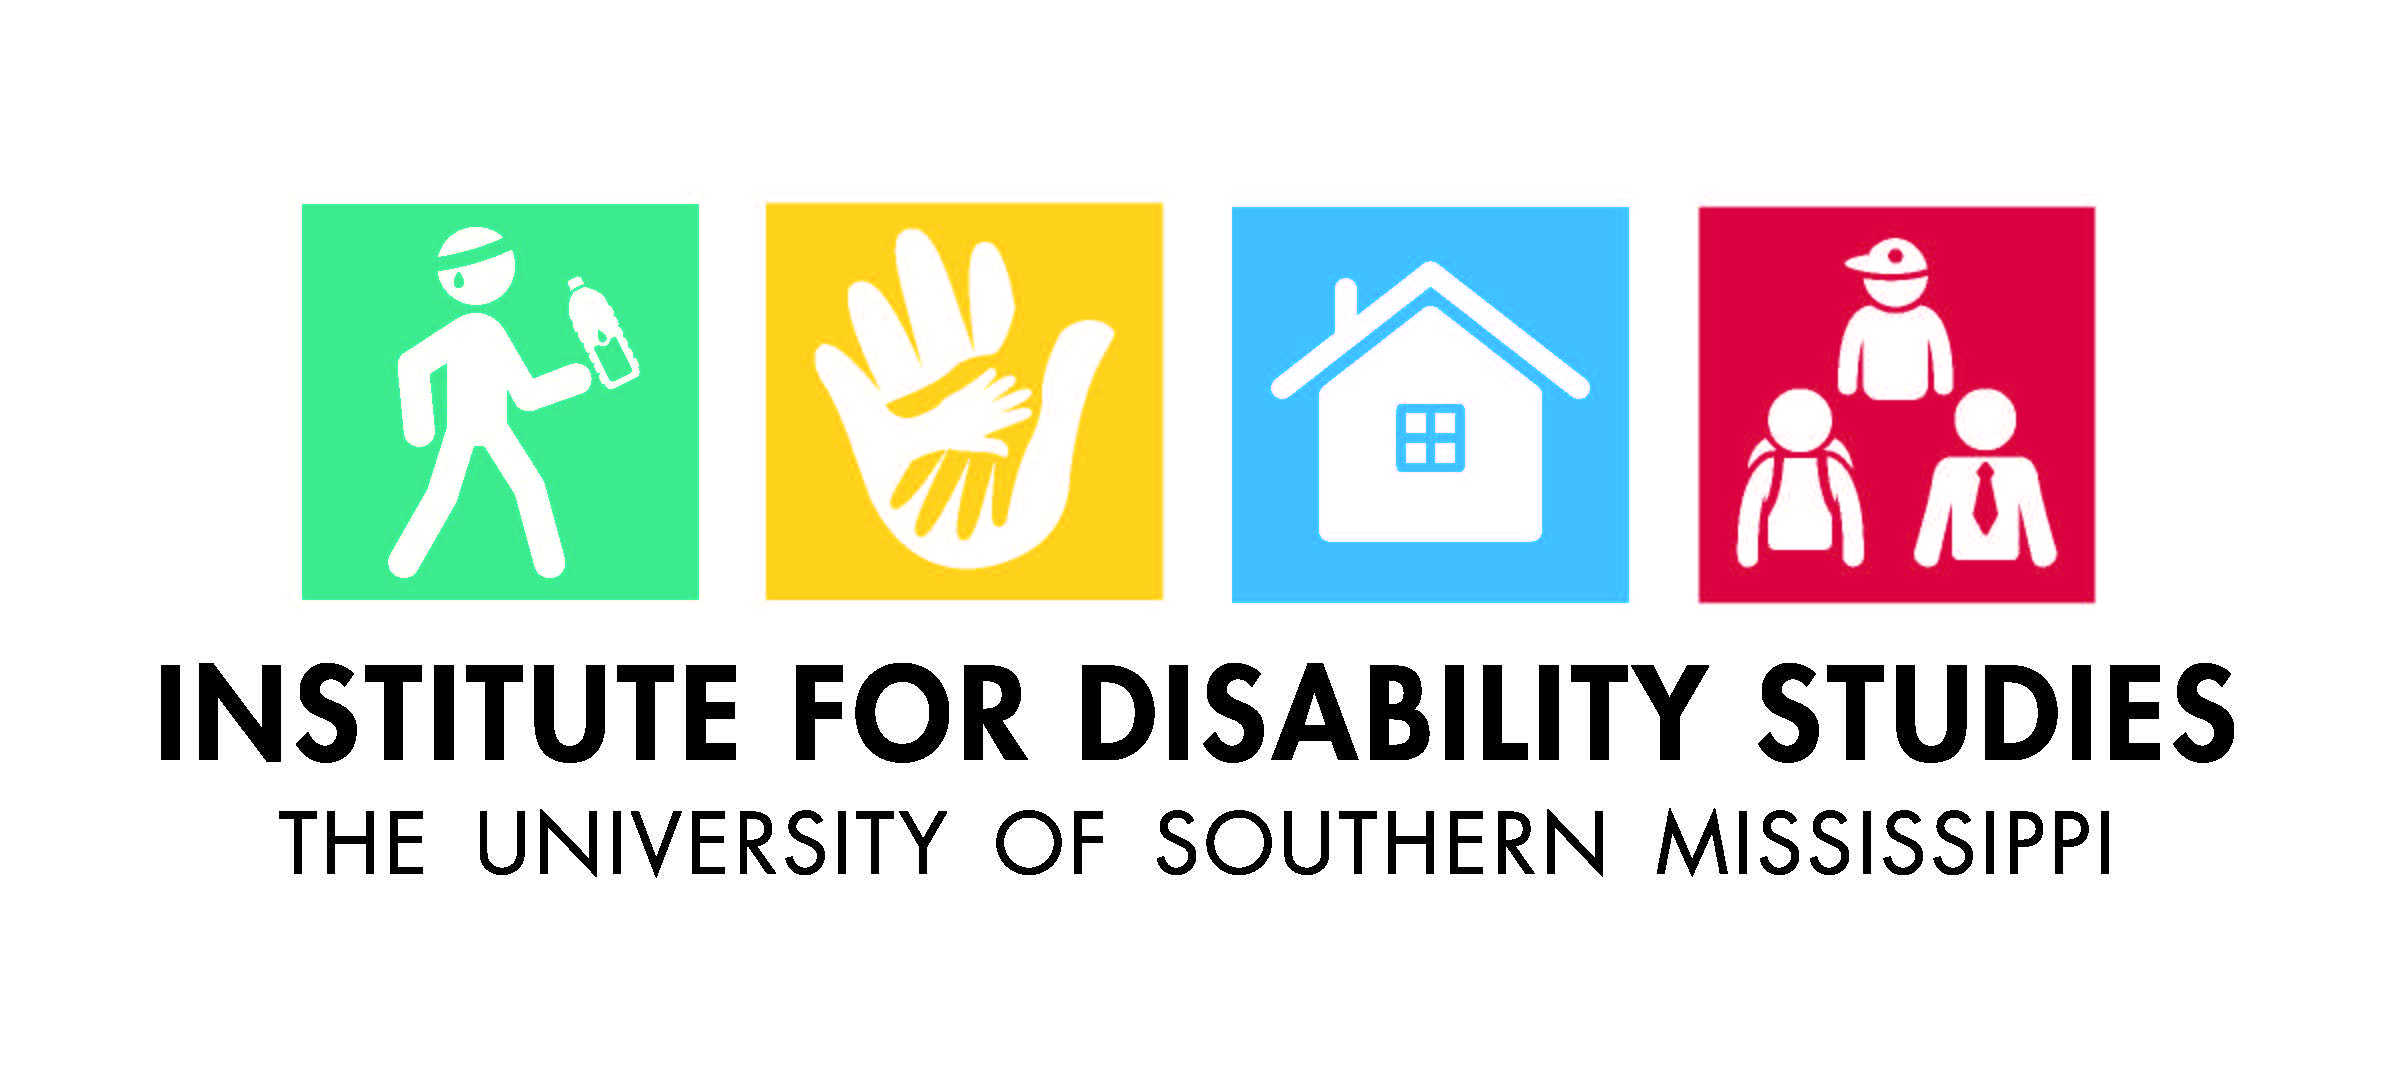 The Institute for Disability Studies (IDS) at The University of Southern Mississippi (USM) 